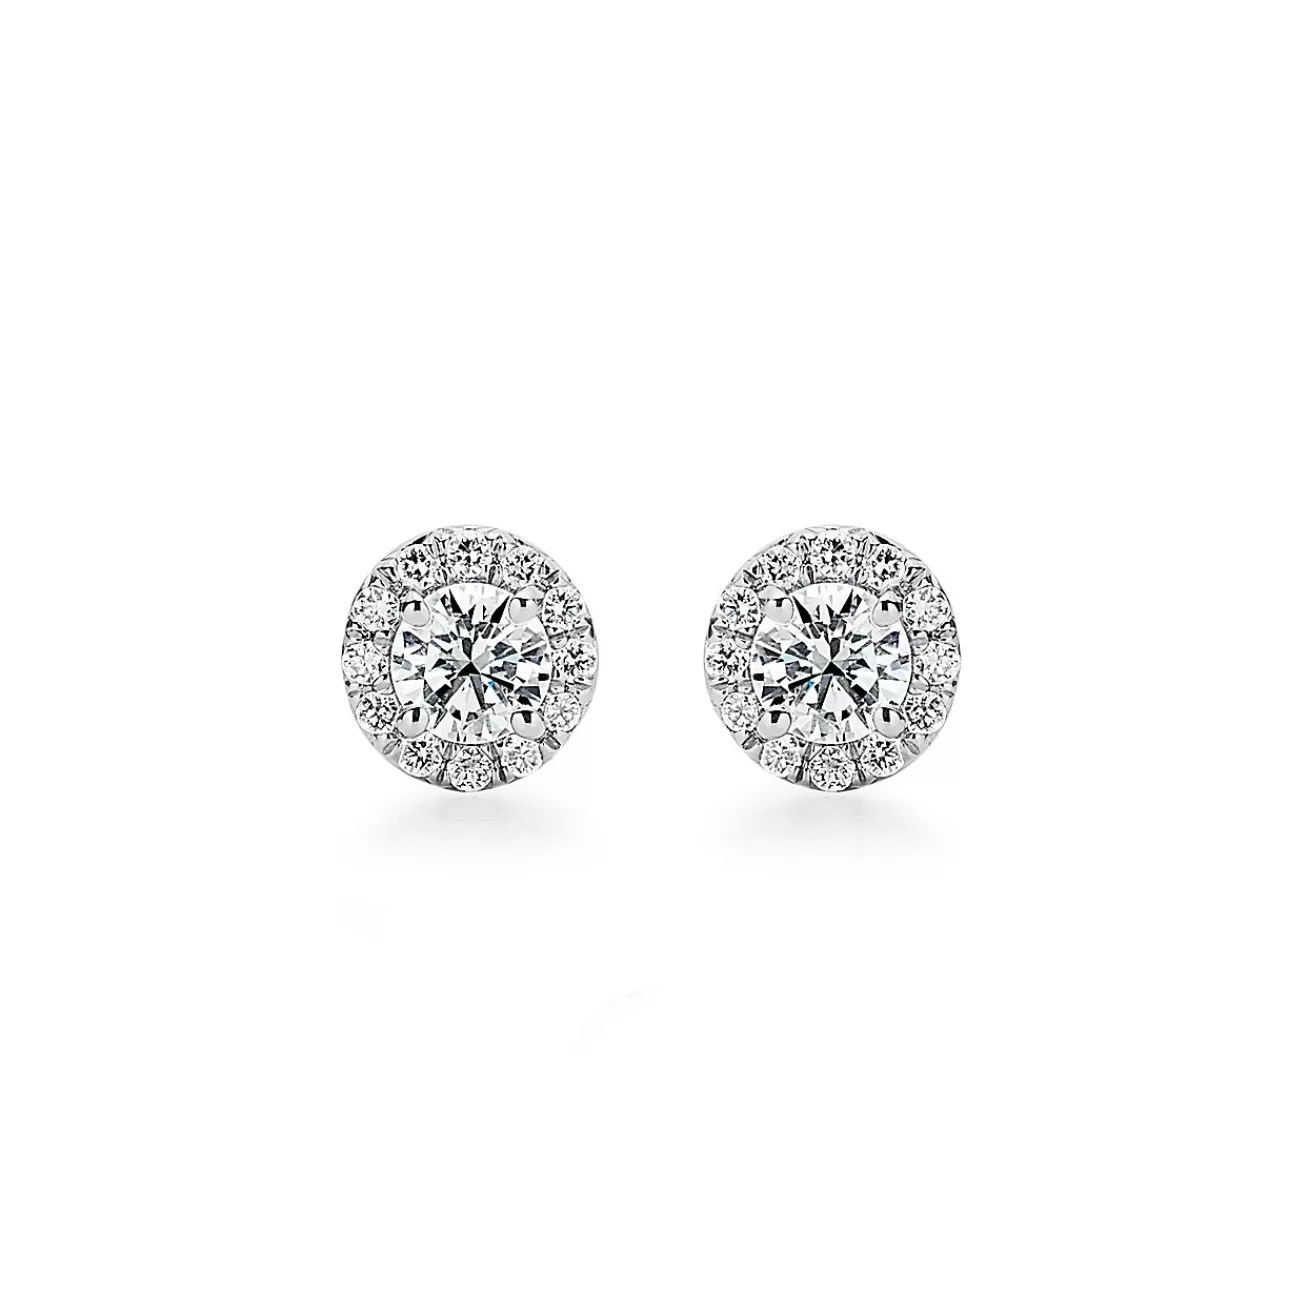 Tiffany & Co. Tiffany Soleste® earrings in platinum with diamonds. | ^ Earrings | Gifts for Her